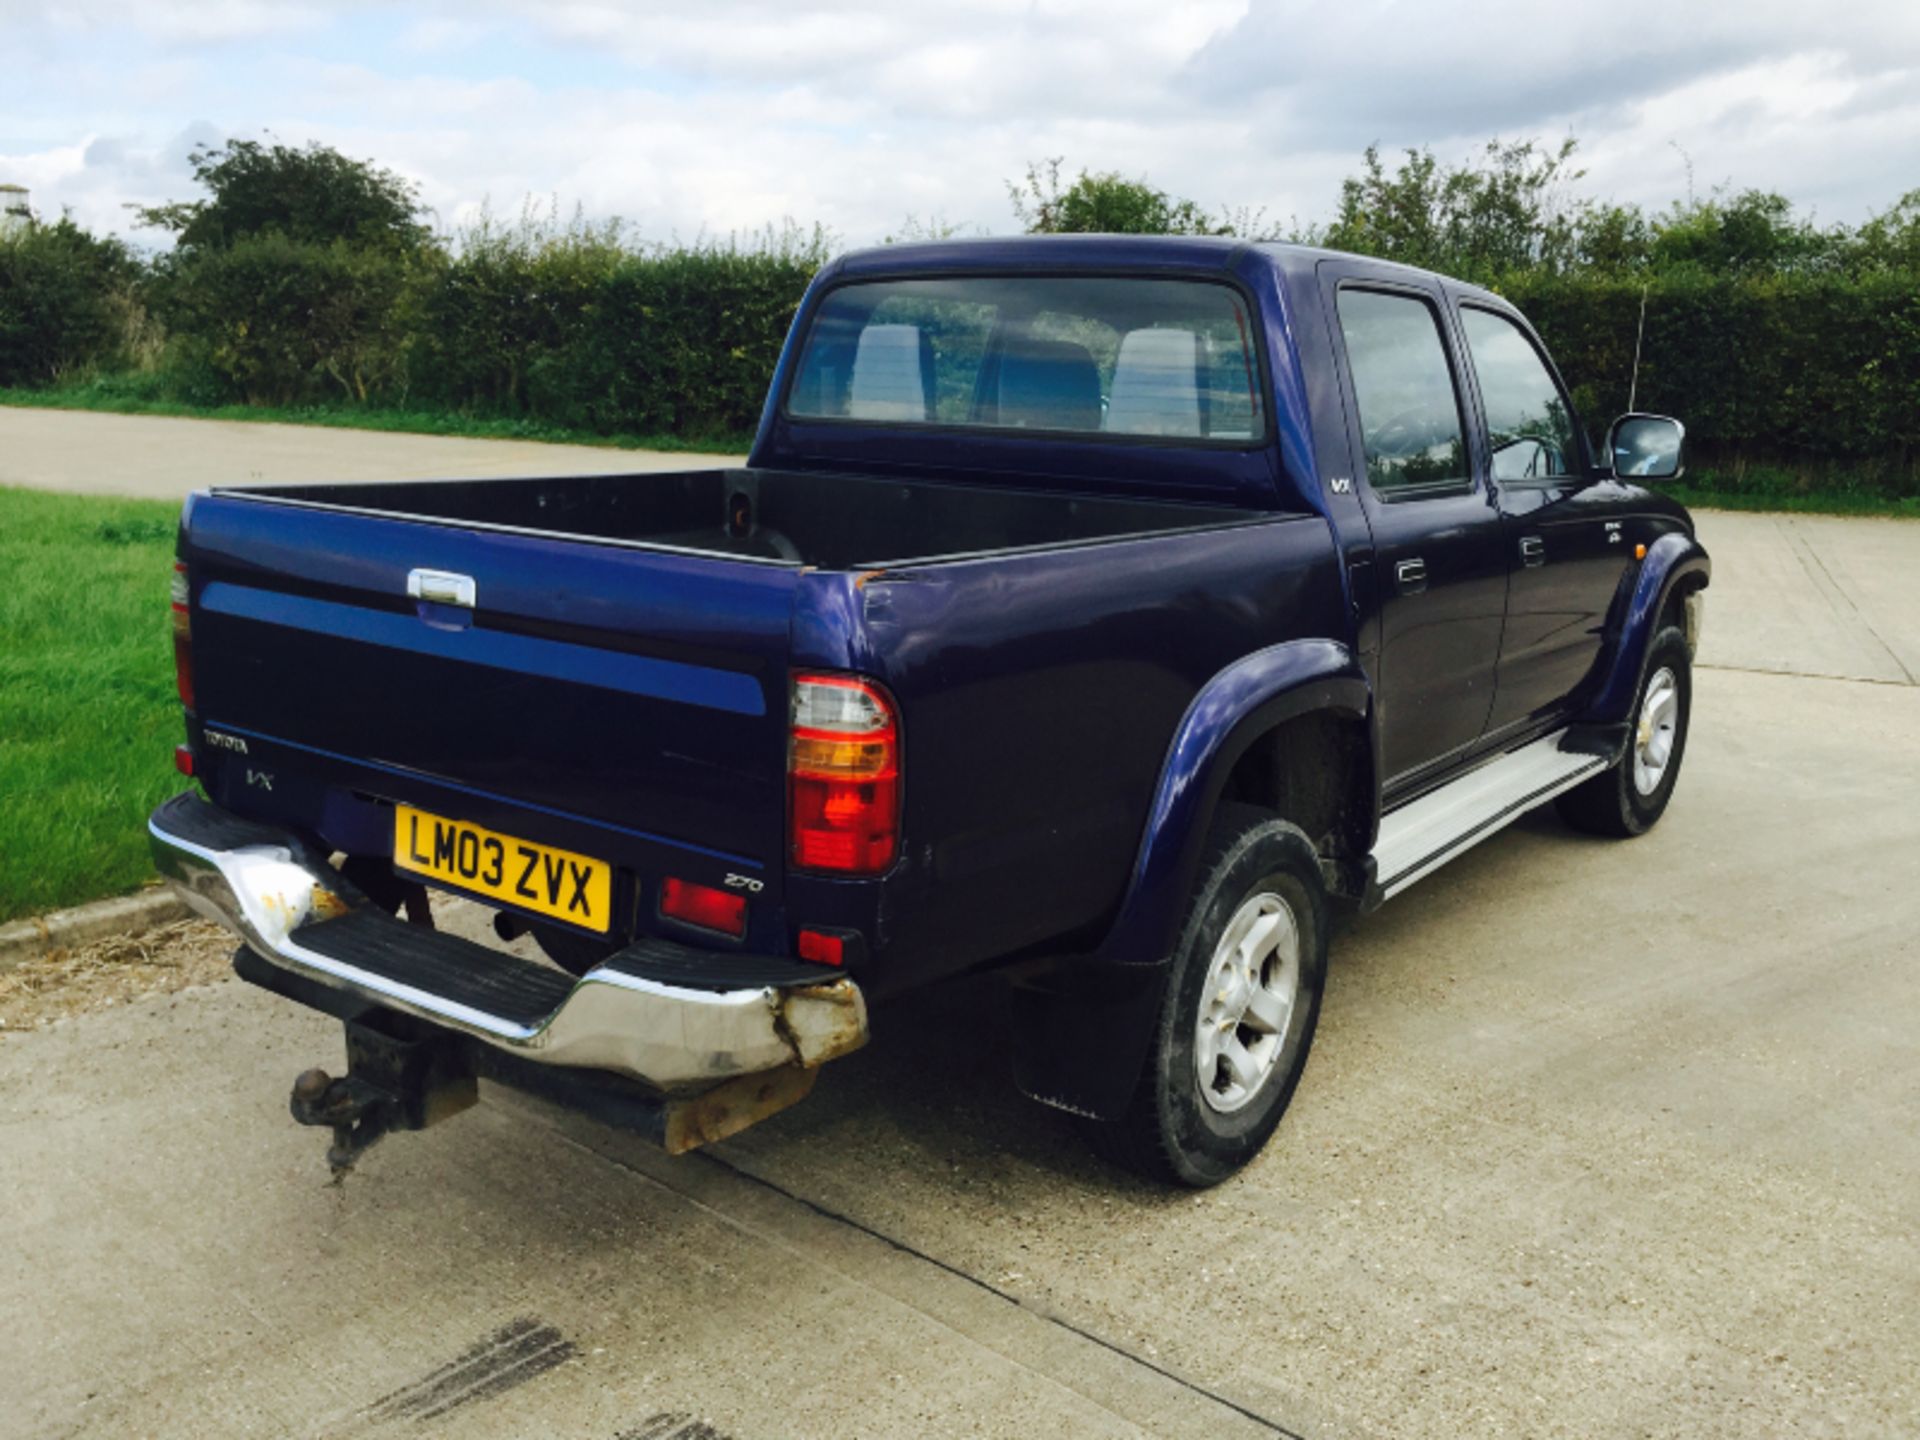 TOYOTA HILUX *VX MODEL* 2.5 (2003-03 REG) **AIR CON** EX COMPANY OWNED* ONLY COVERED 85,099 MILES!!! - Image 5 of 8